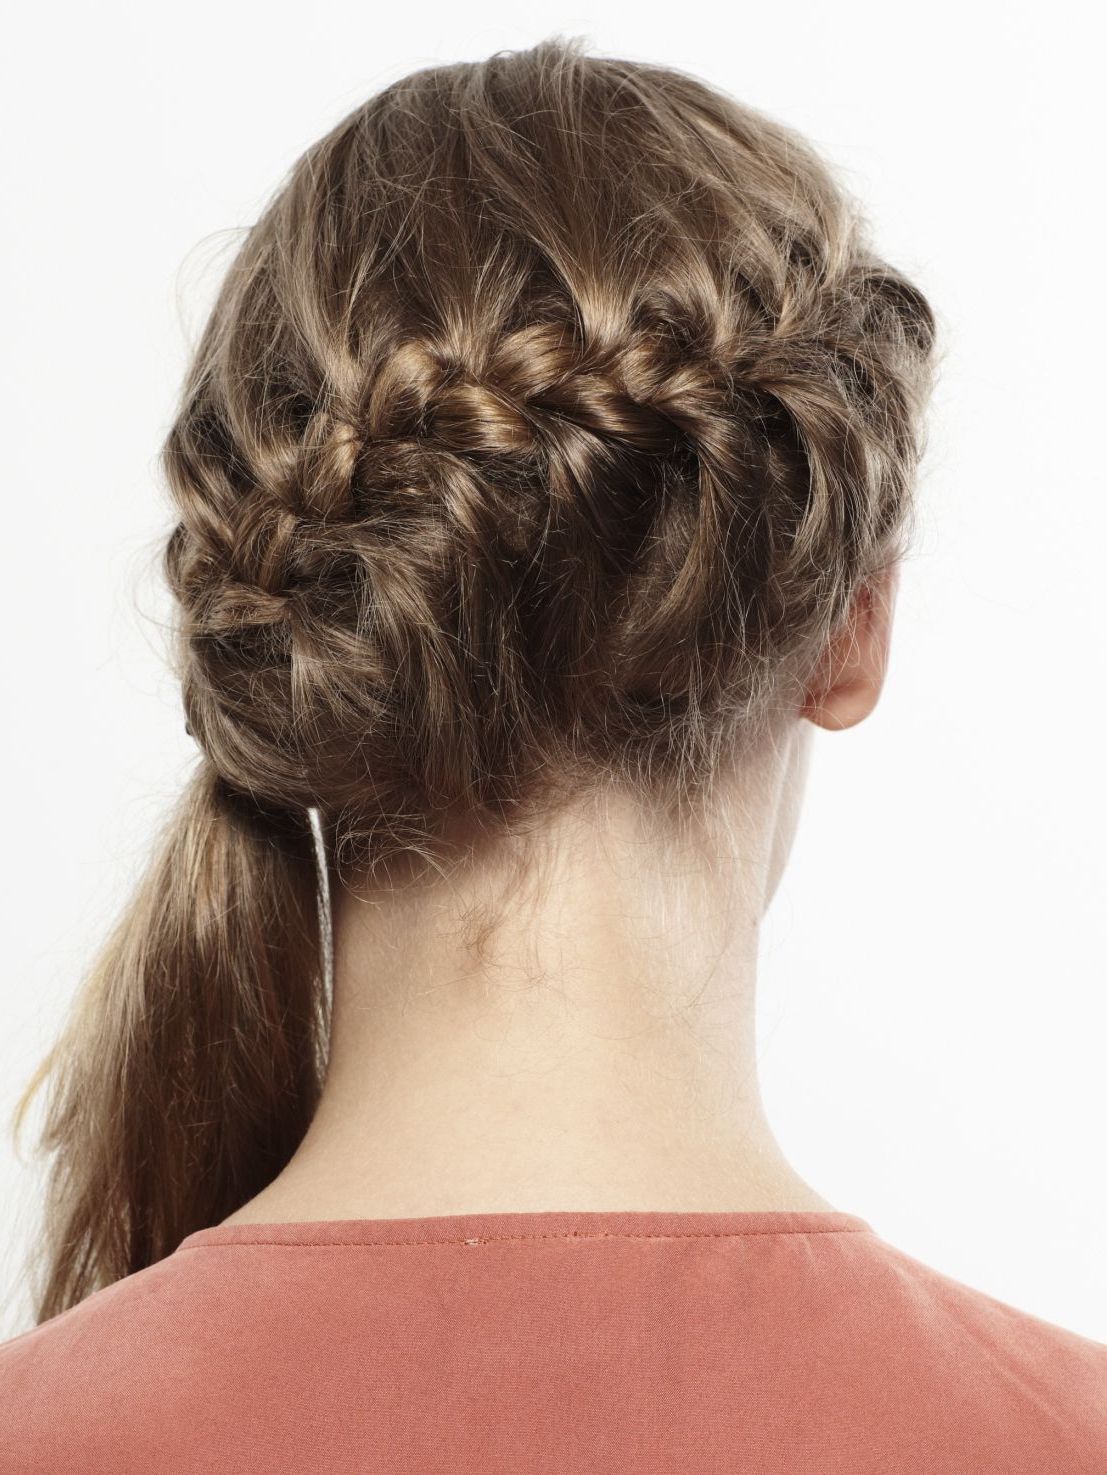 10 Ways To Execute The Perfect Braided Hairstyle (View 8 of 20)